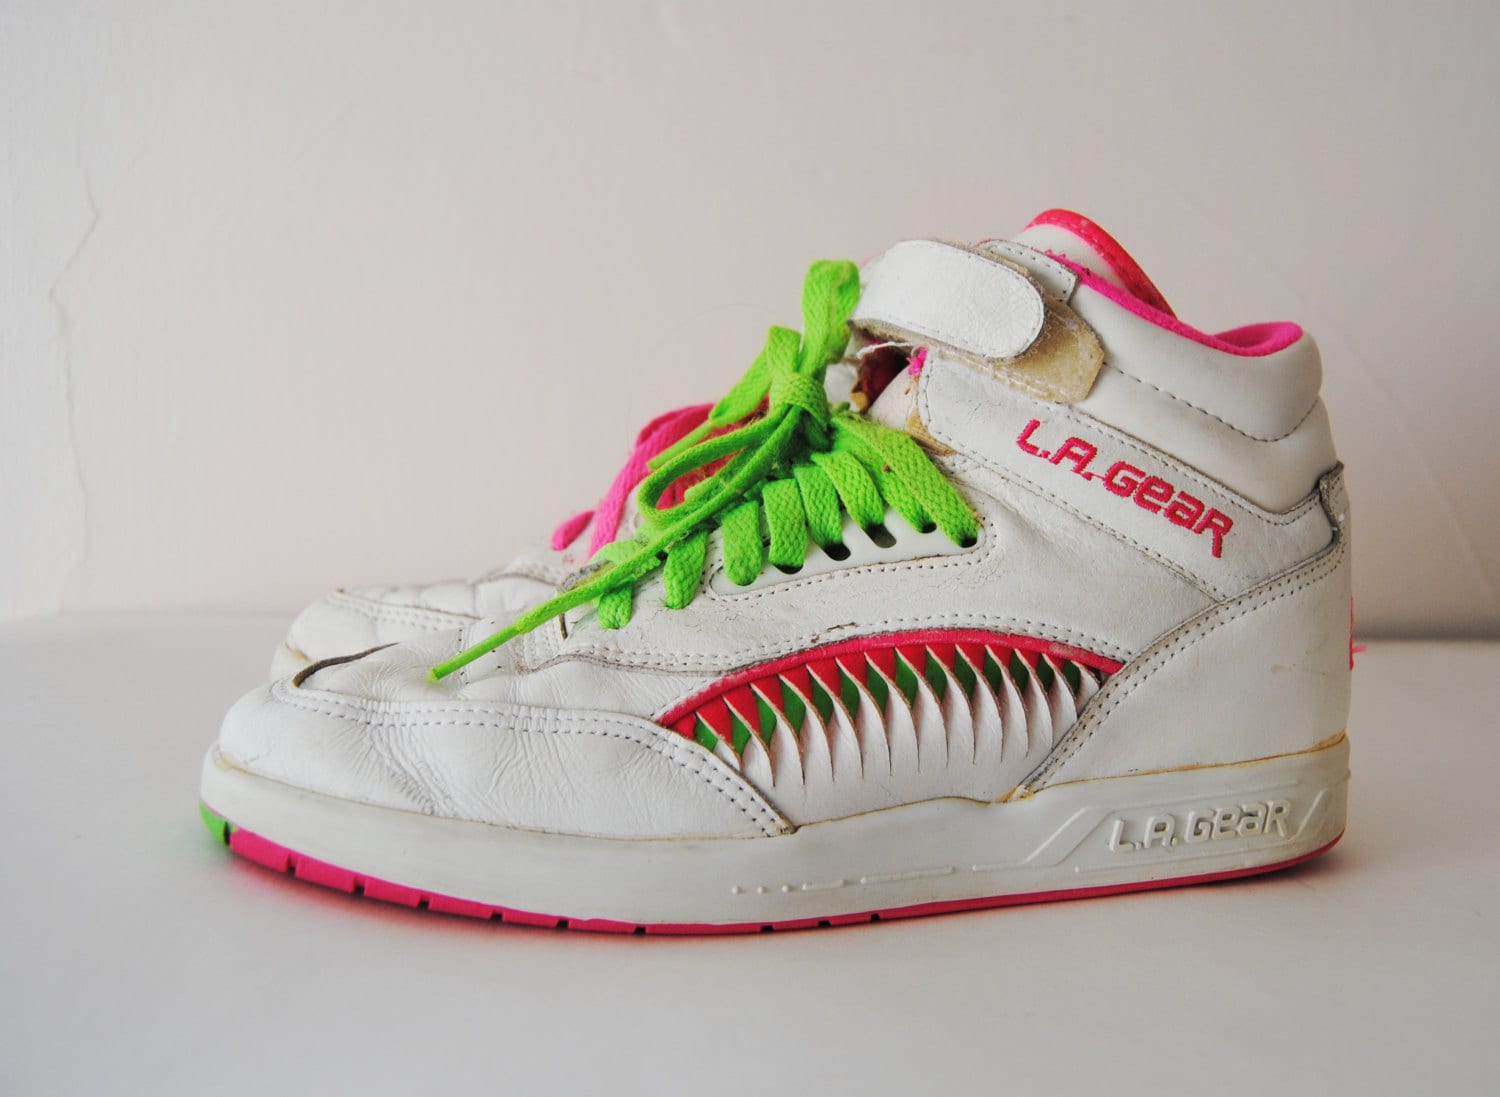 90s Neon Hi Top Sneakers Vintage L.A. Gear White Leather